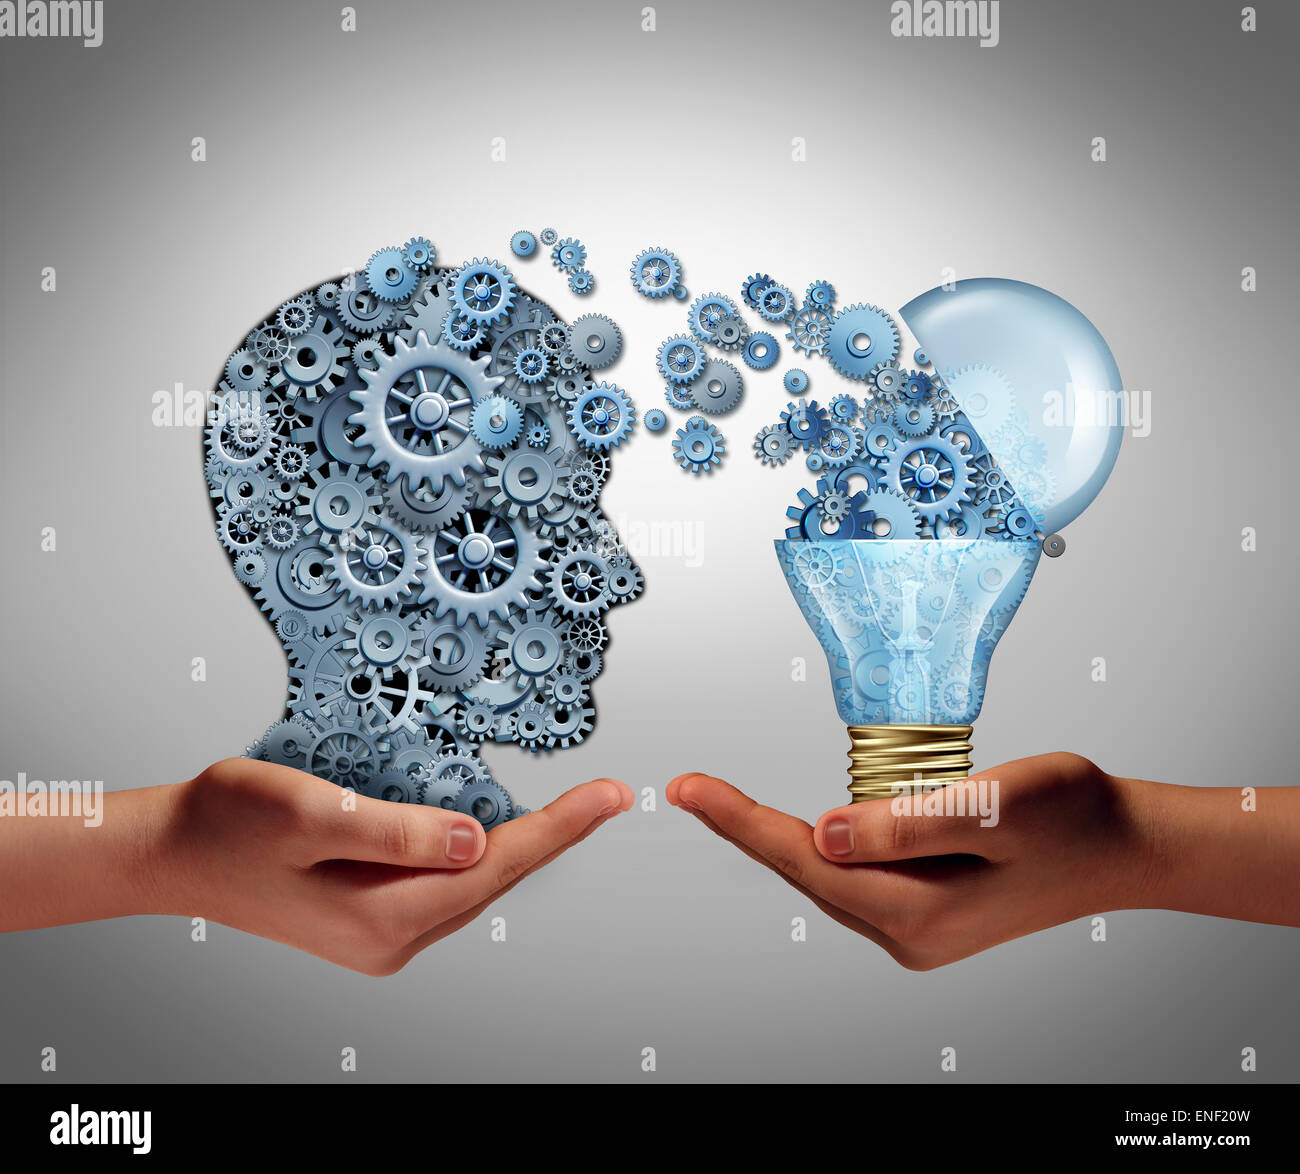 Concept of creating ideas and achievement symbol of aspiration success as two hands holding a group of connected gears shaped as a human head and an open lightbulb as an icon of imagination and innovation. Stock Photo